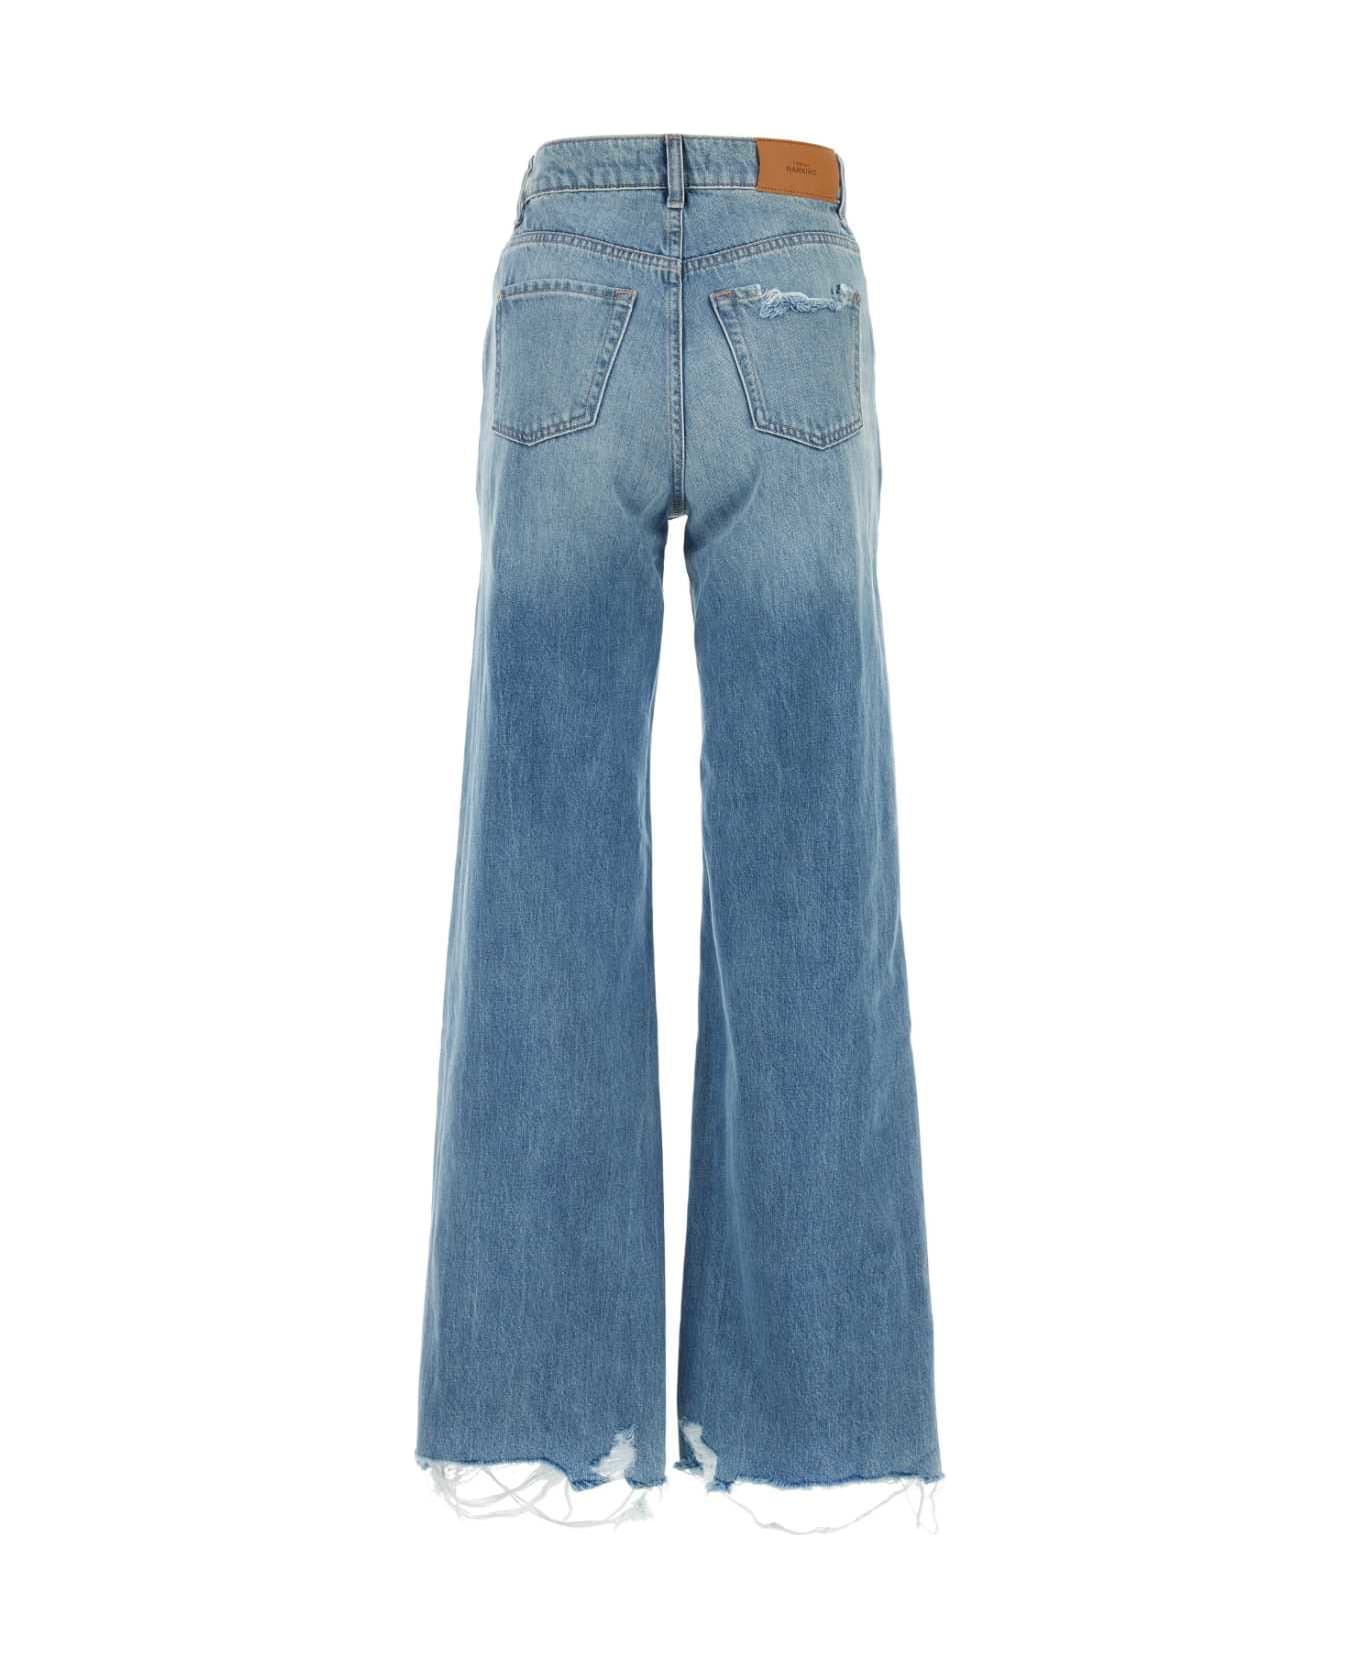 7 For All Mankind Denim Scout Wide-leg Jeans - MIDBLUE